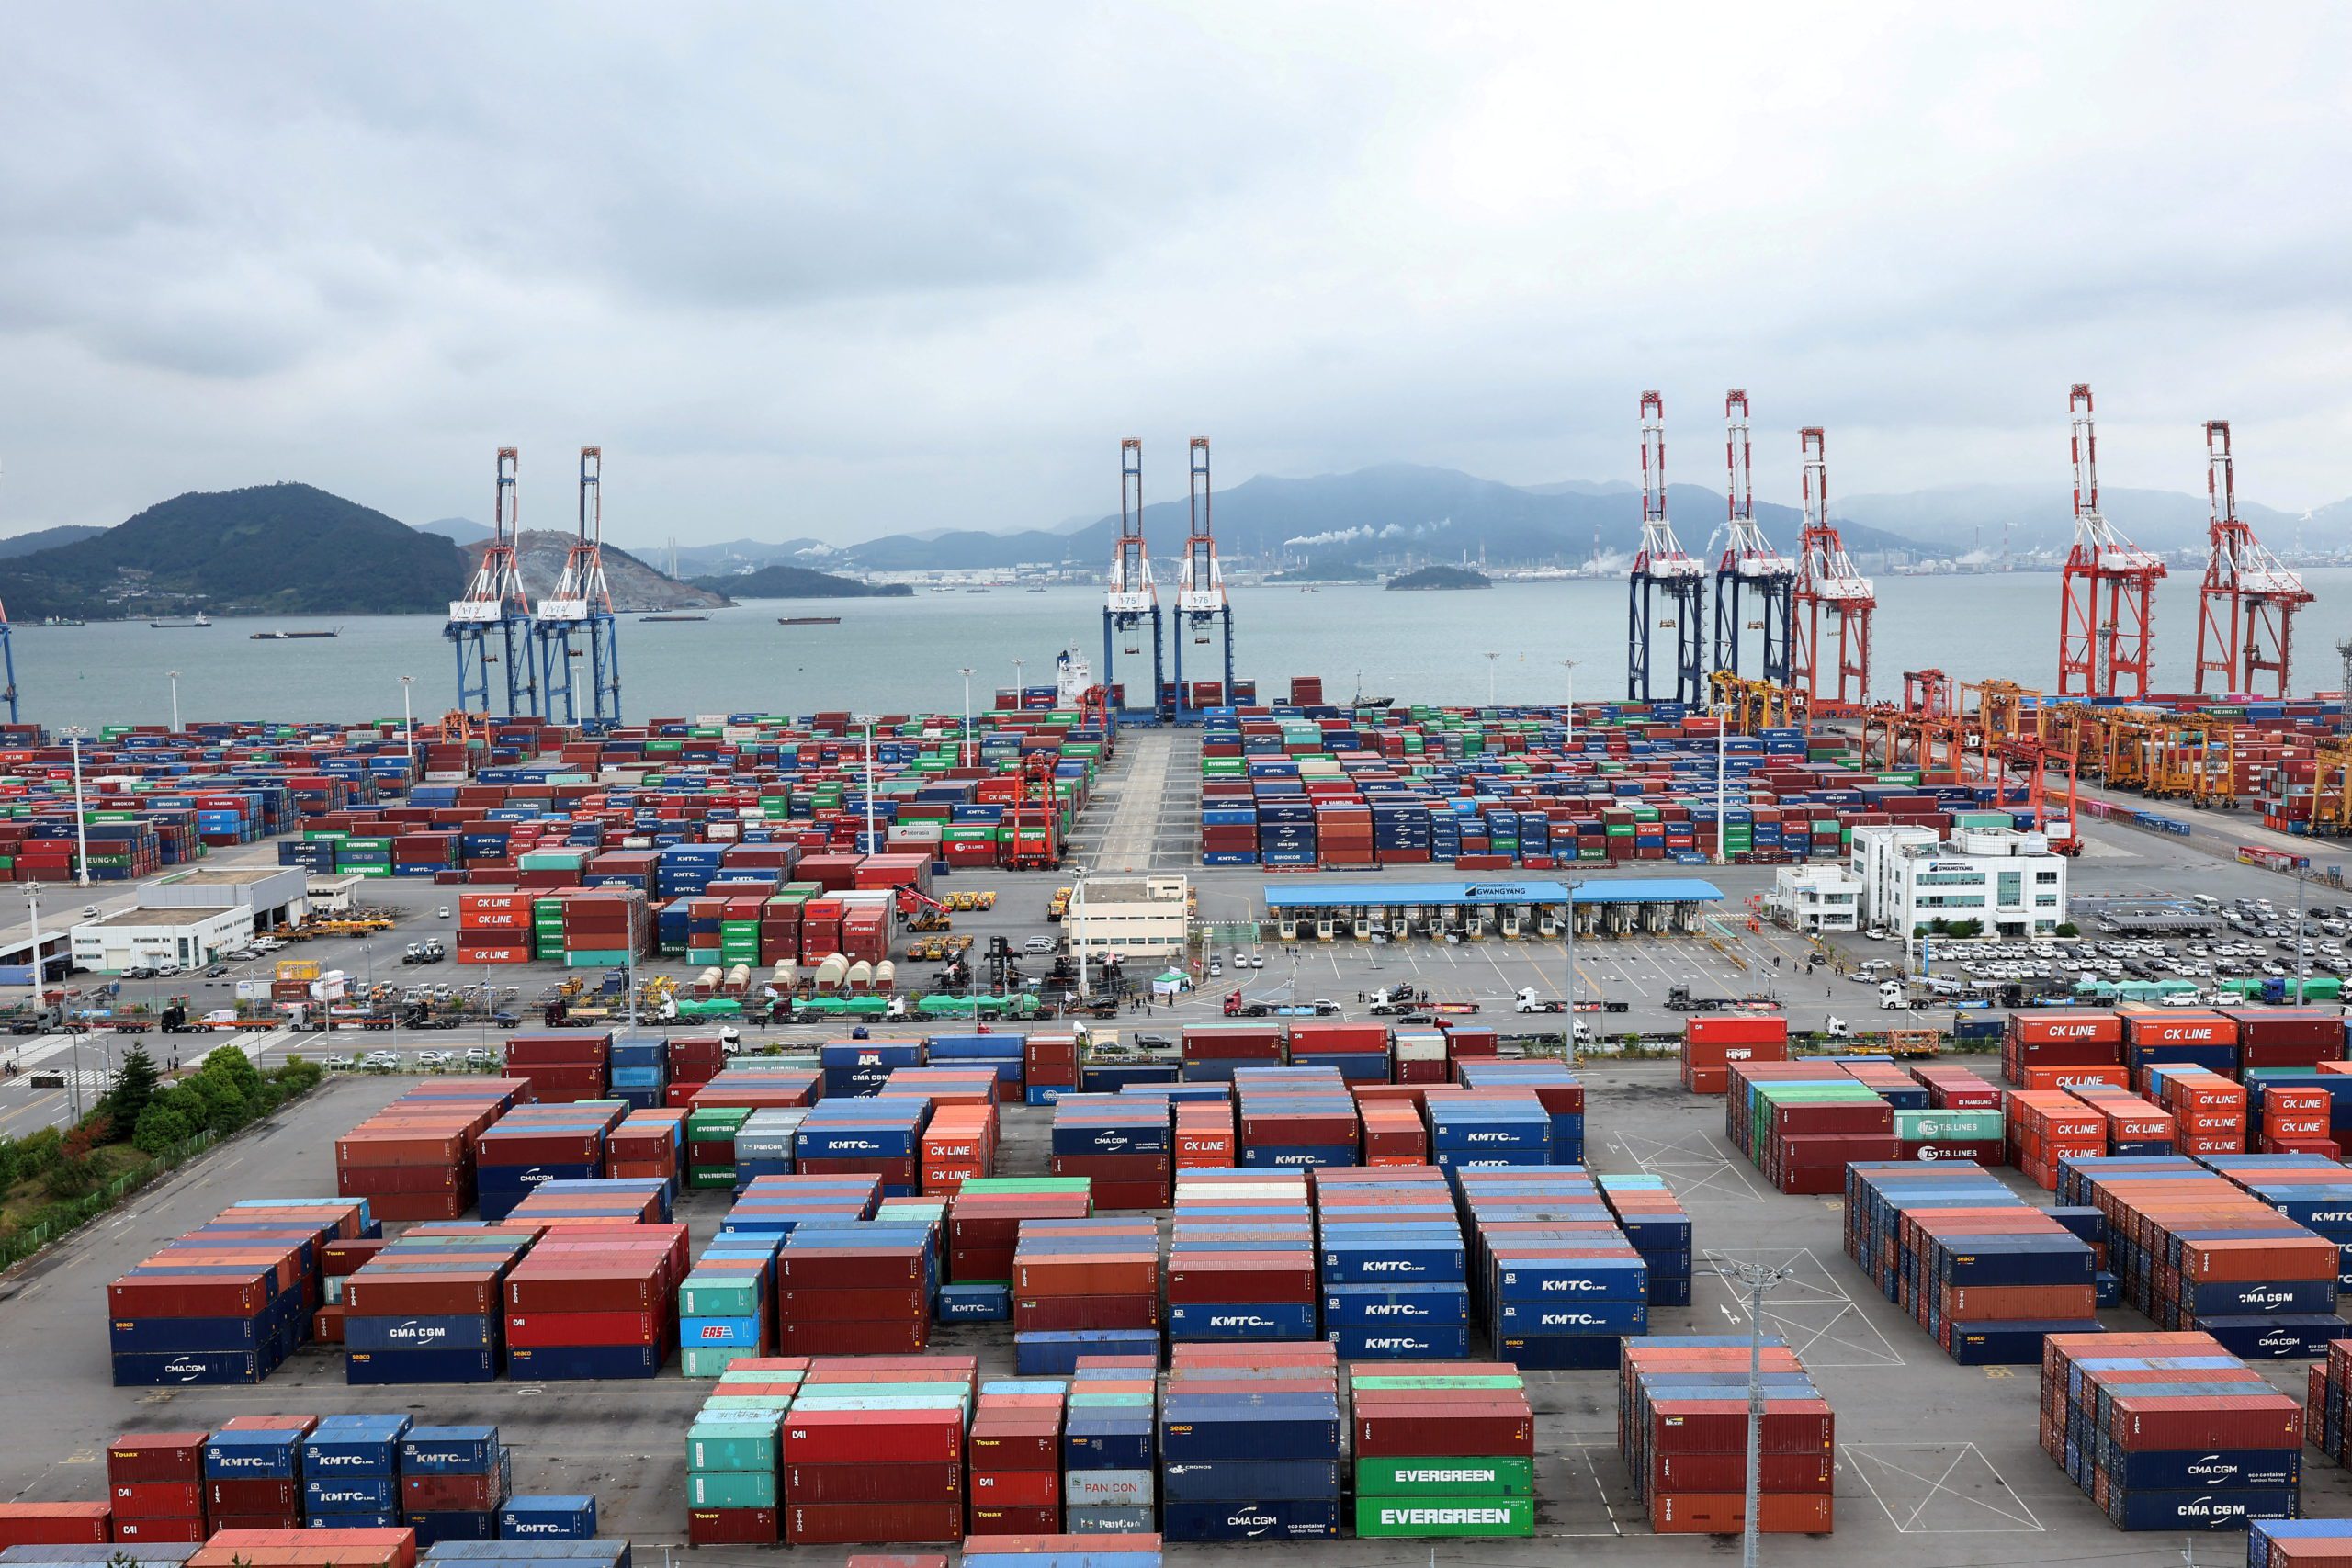 FILE PHOTO: Shipping containers are stacked at Gwangyang port in Gwangyang, South Korea, June 14, 2022. Yonhap via REUTERS